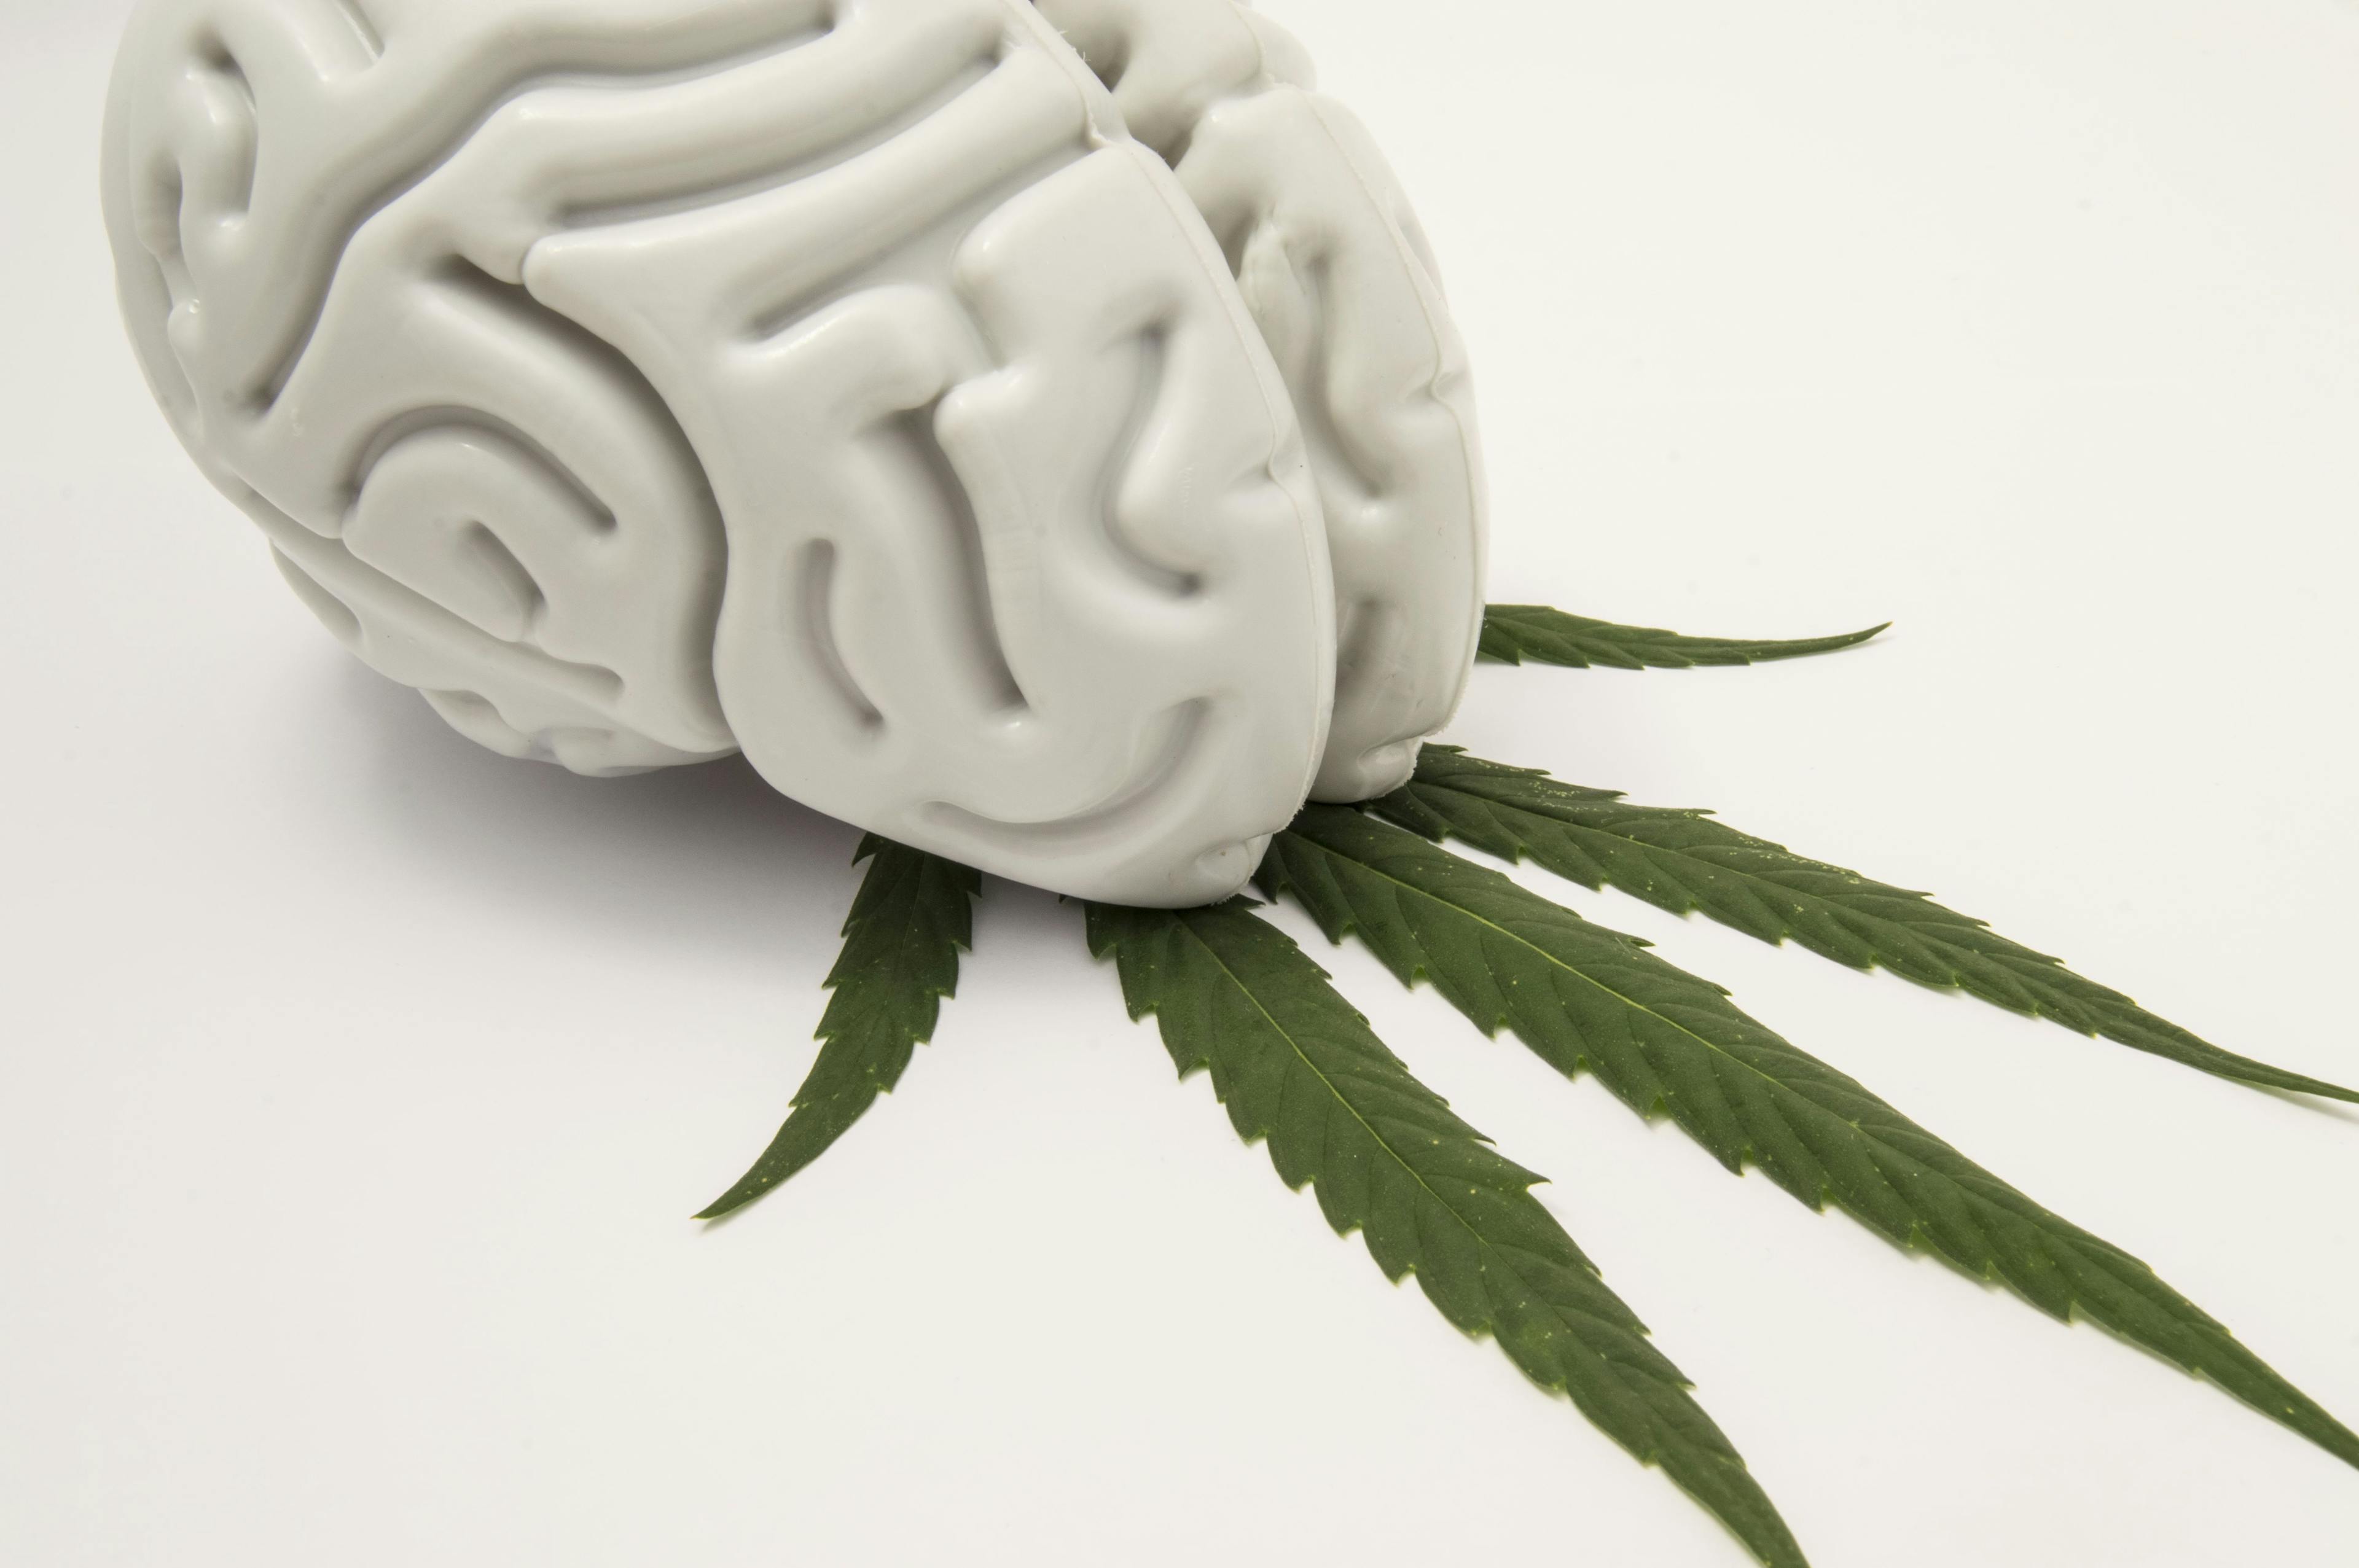 What is the effect of cannabis use on adherence to medications in patients with psychosis?